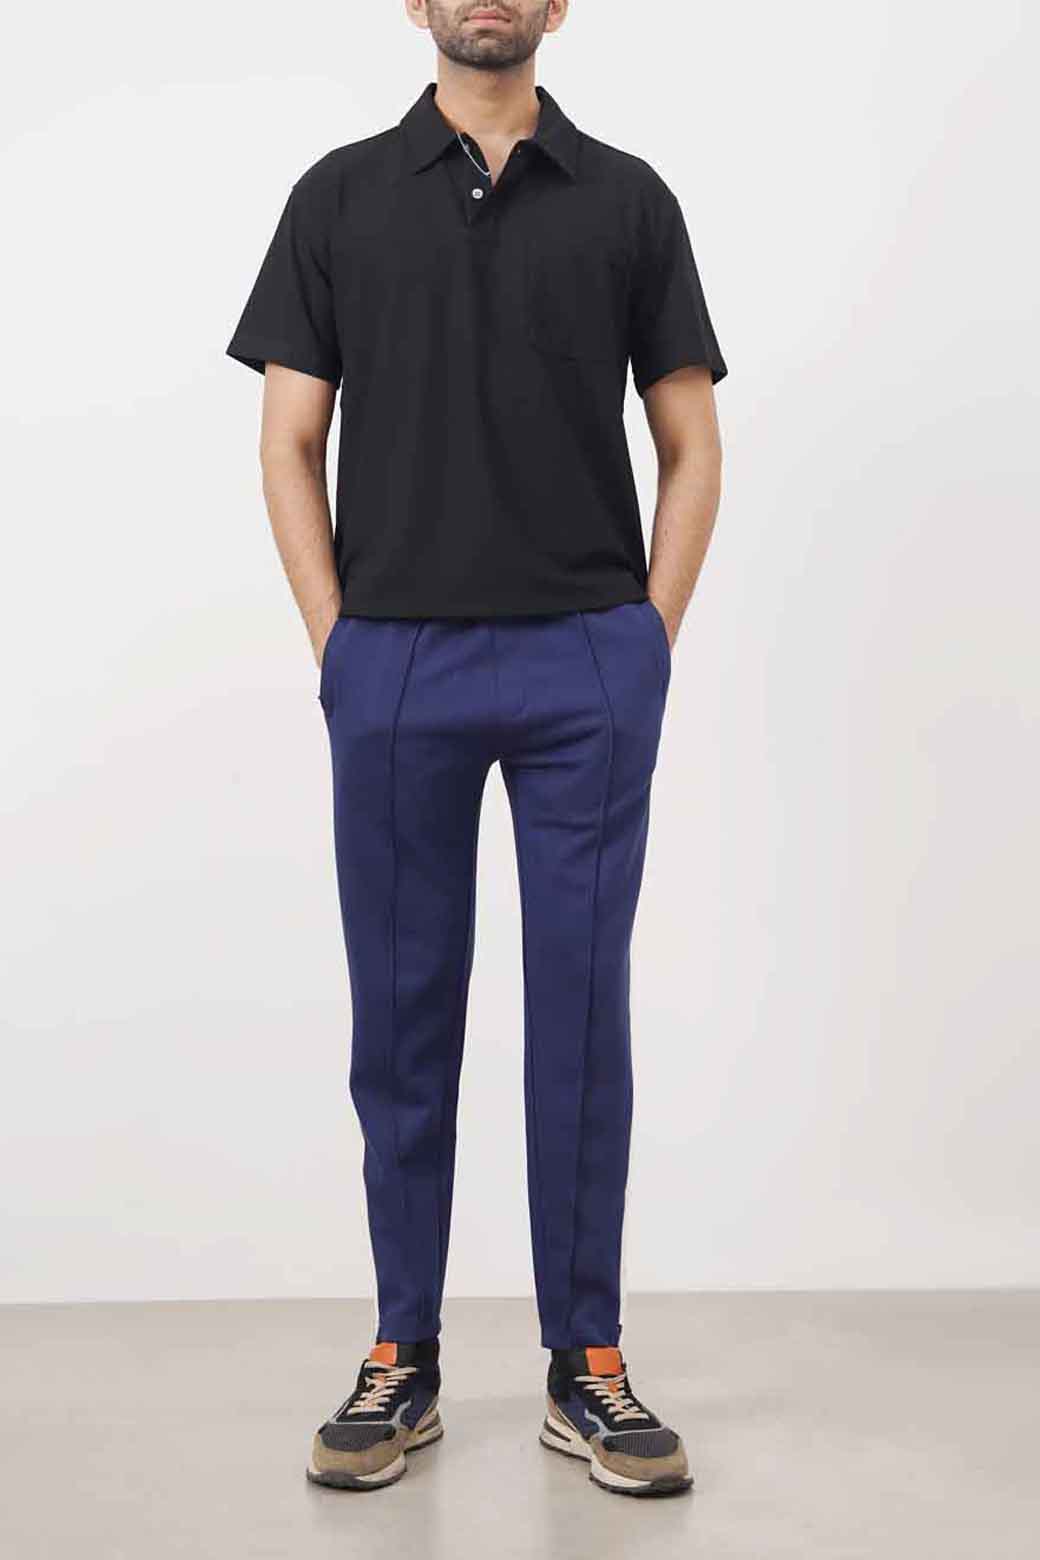 NAVY TROUSER WITH SIDE PANEL